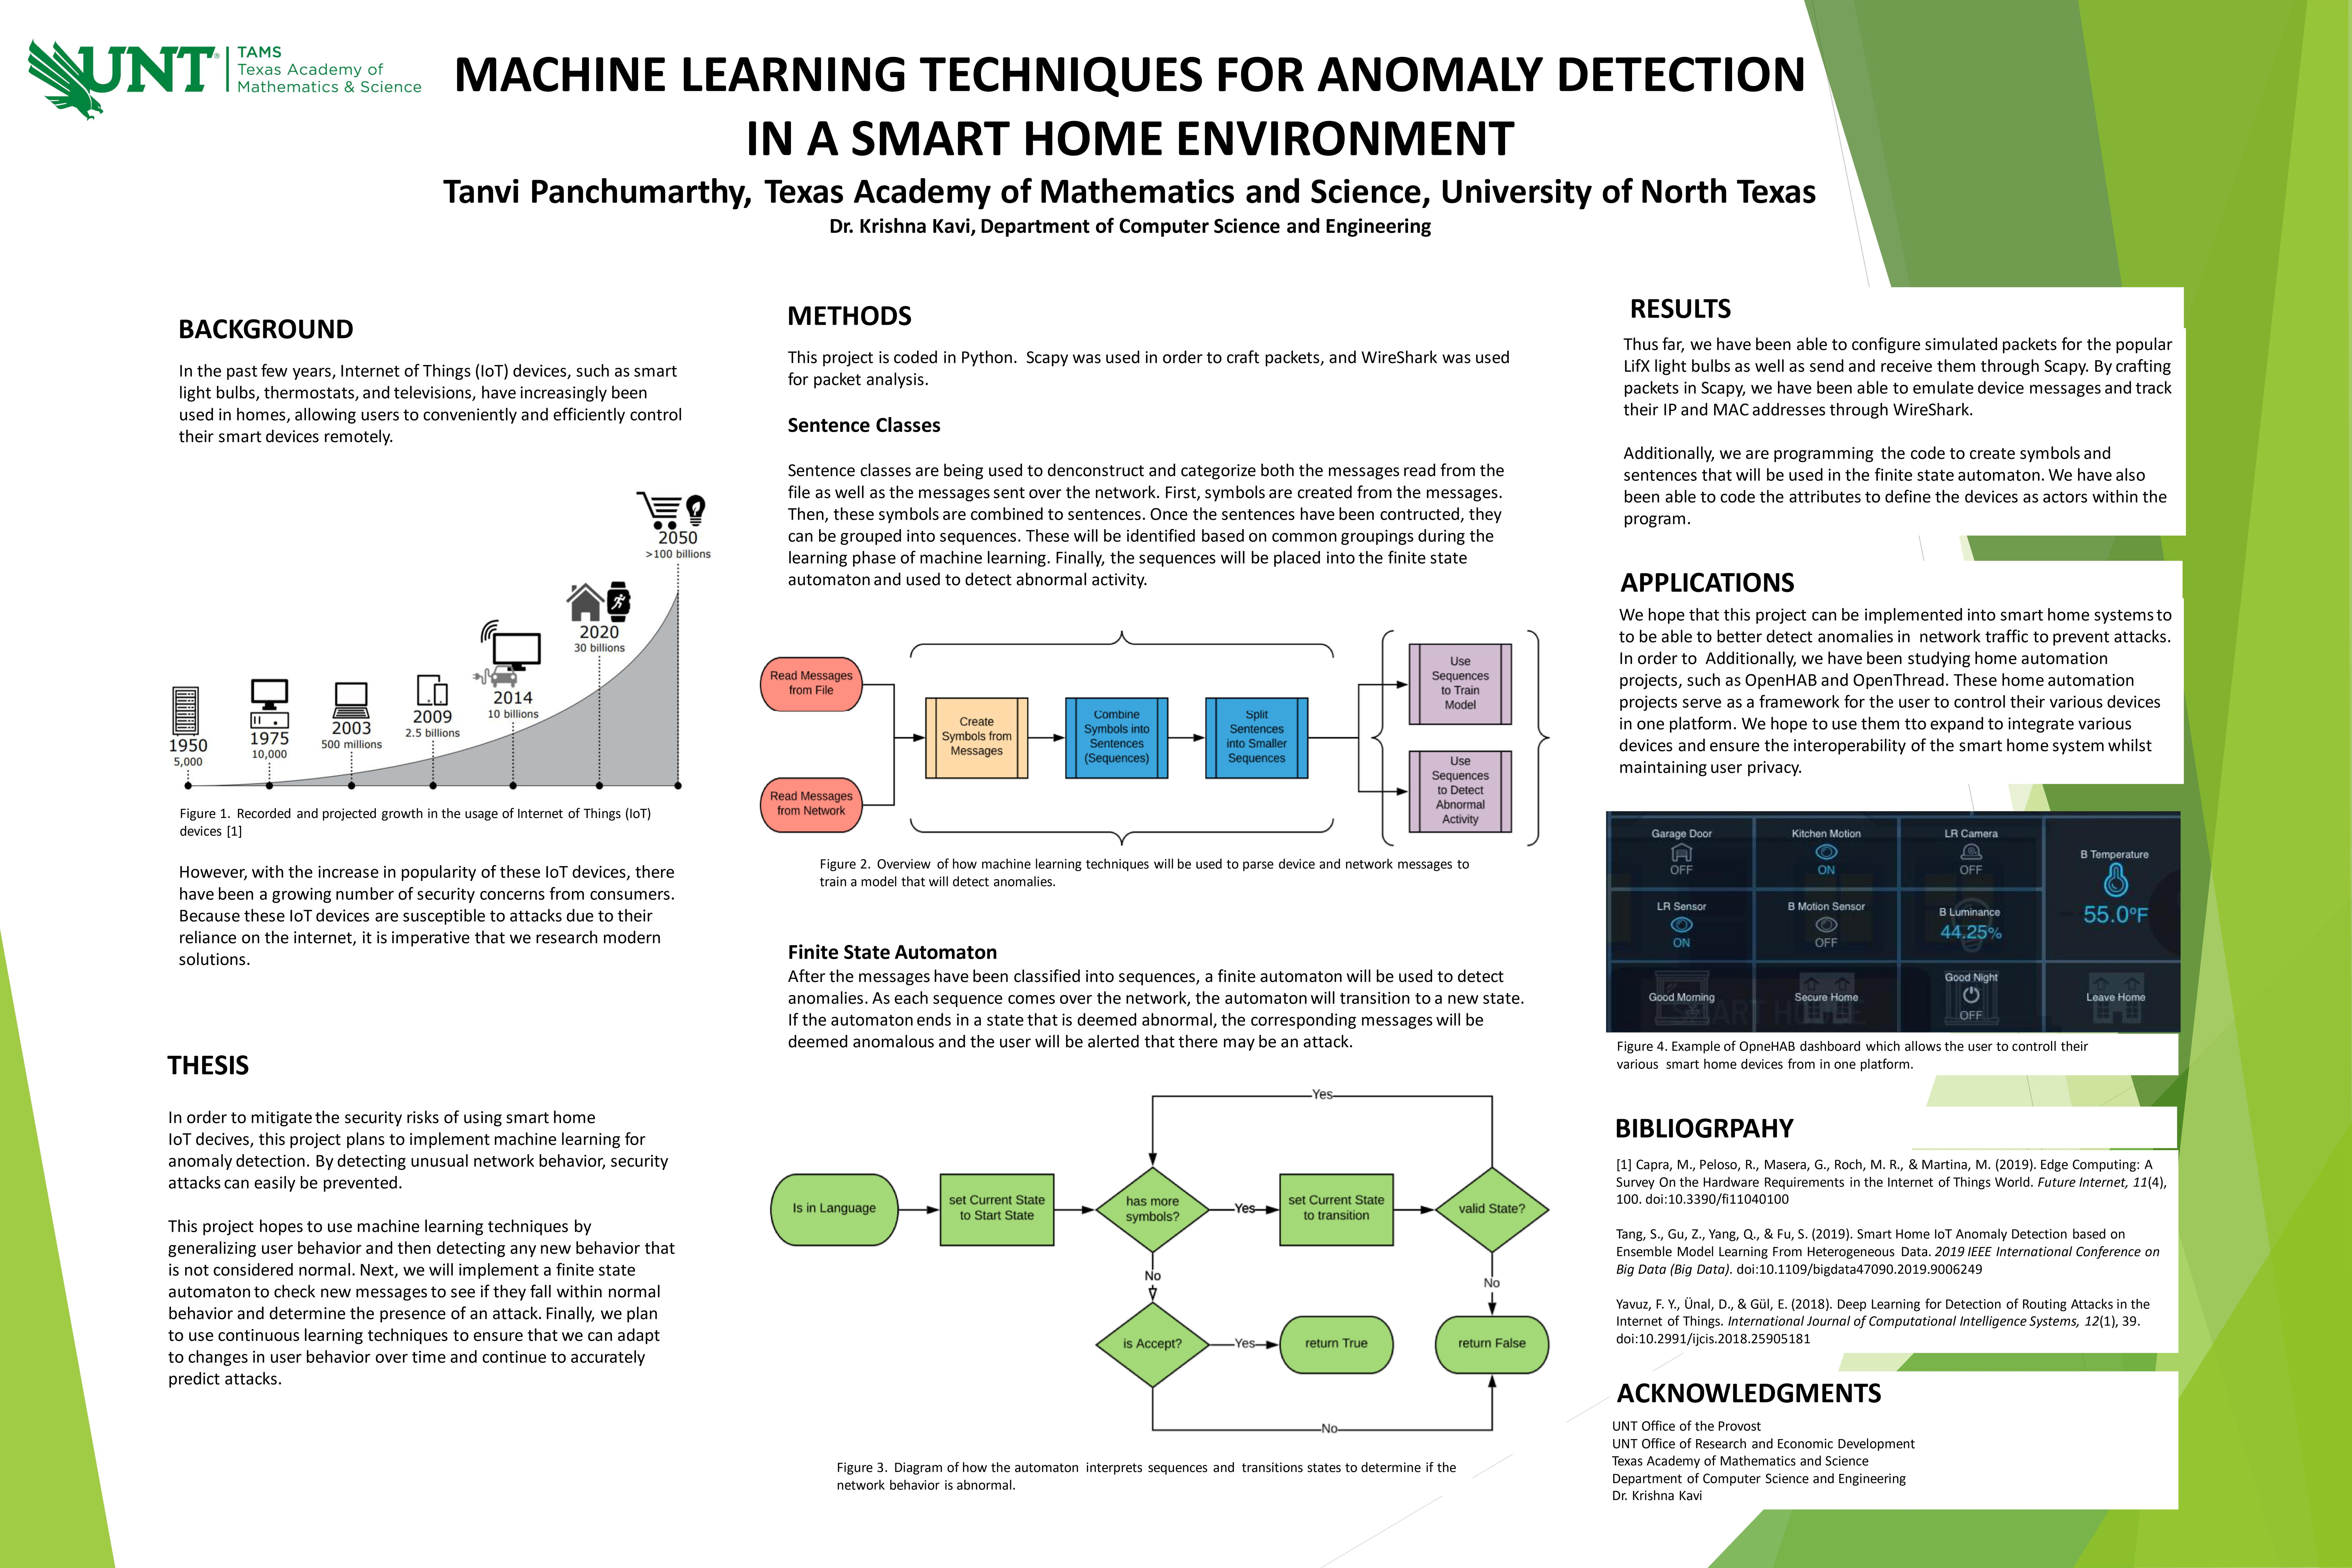 Machine Learning Techniques for Anomaly Detection in a Smart Home Environment